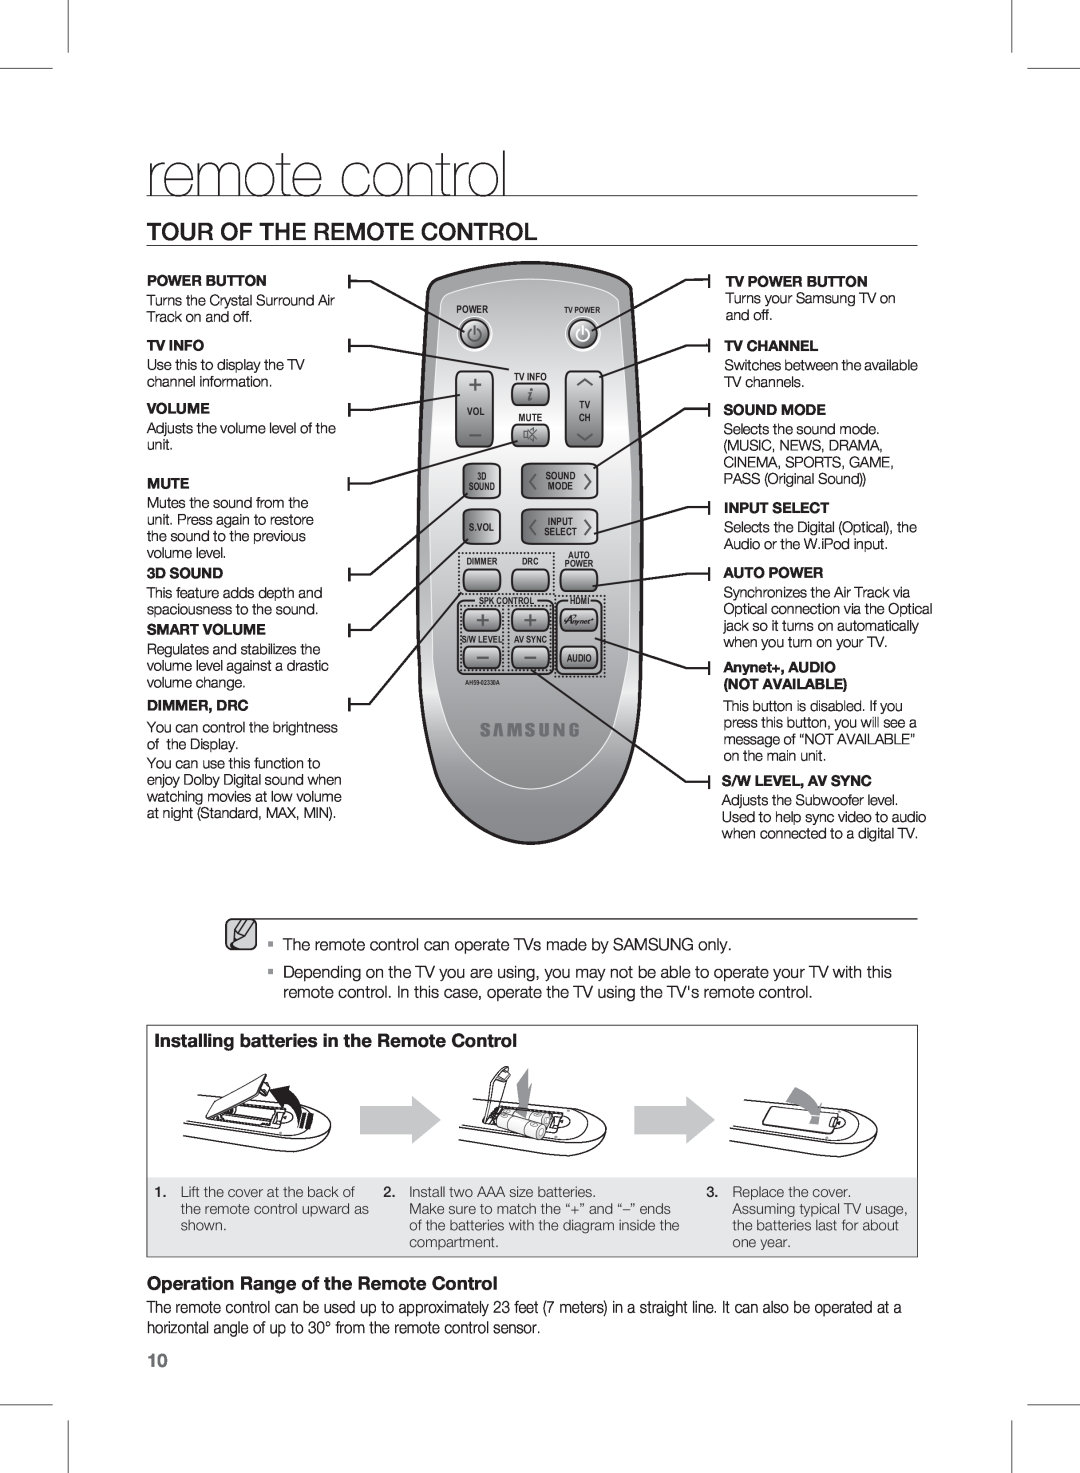 Siemens HW-D450 user manual remote control, Tour of the Remote Control, Installing batteries in the Remote Control 